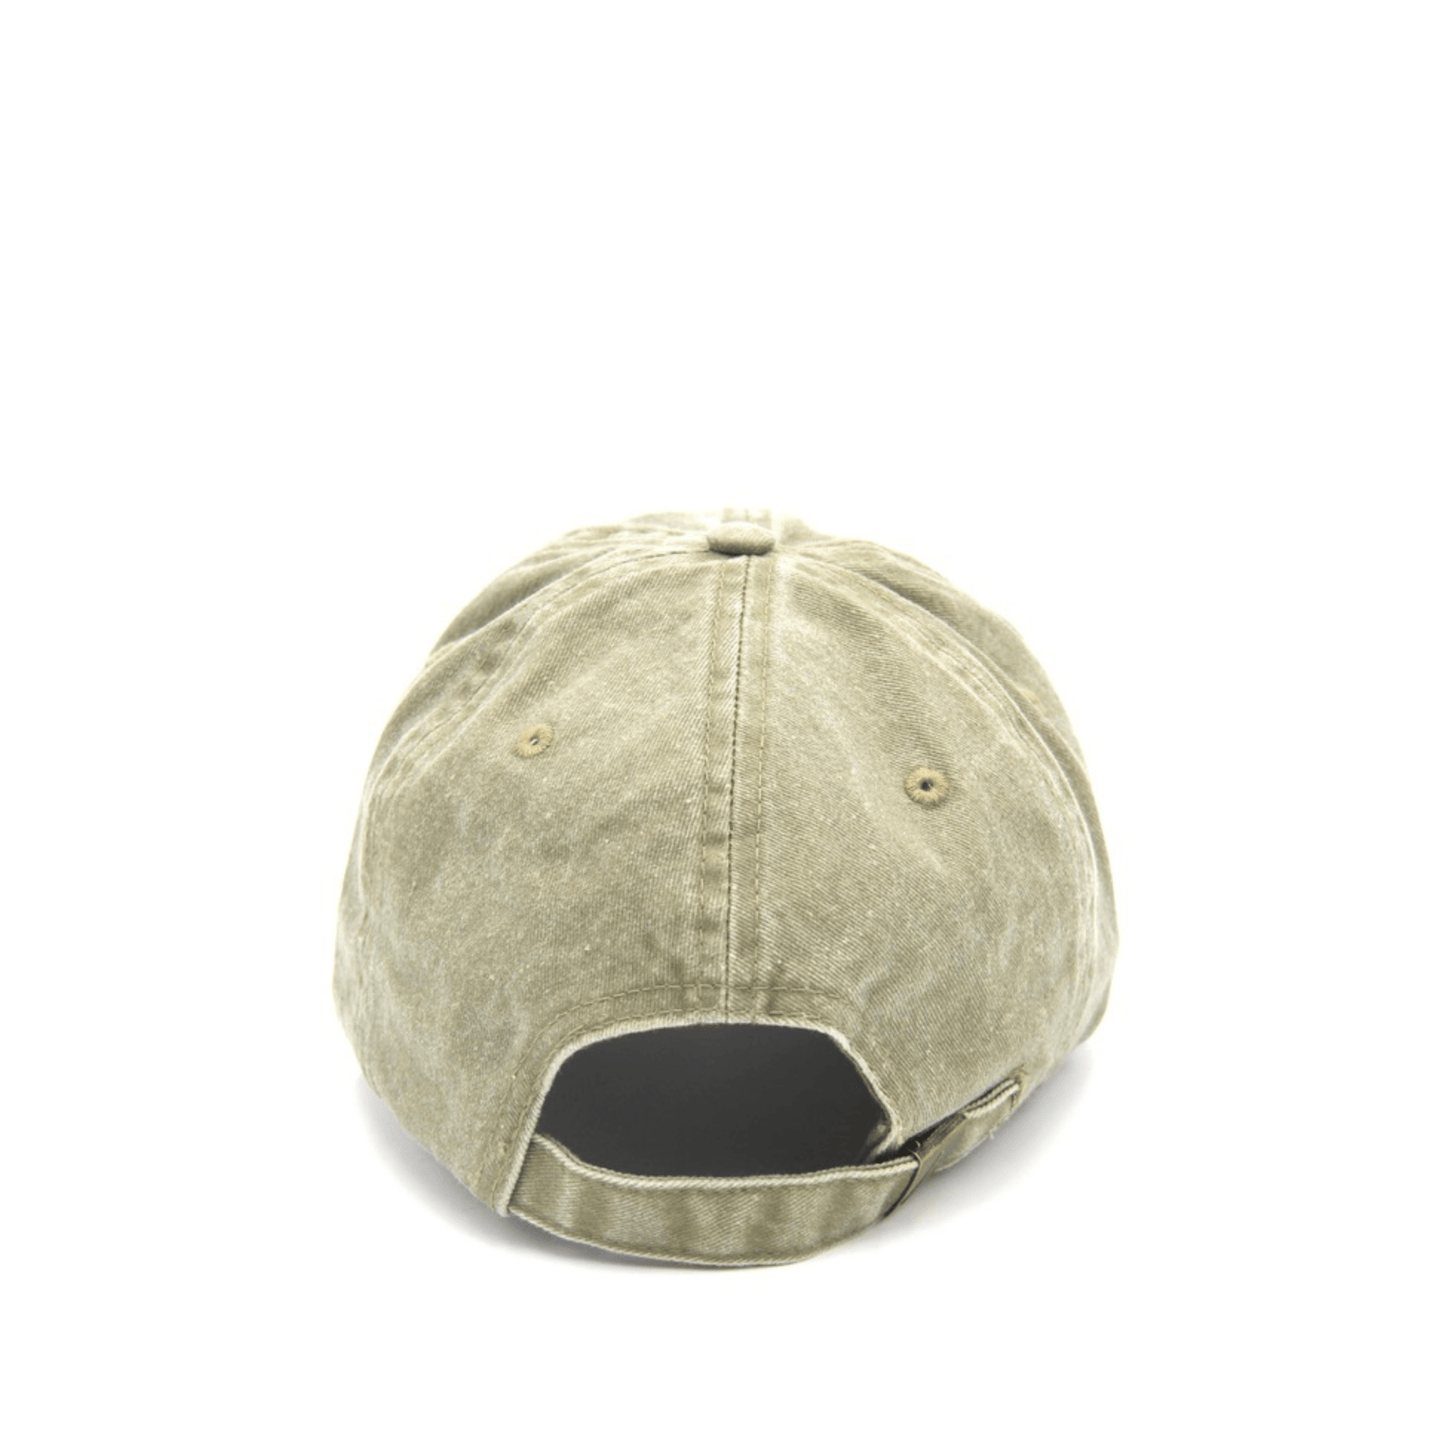 Love Yourself Cap Wear The Peace Dad Caps Washed Olive